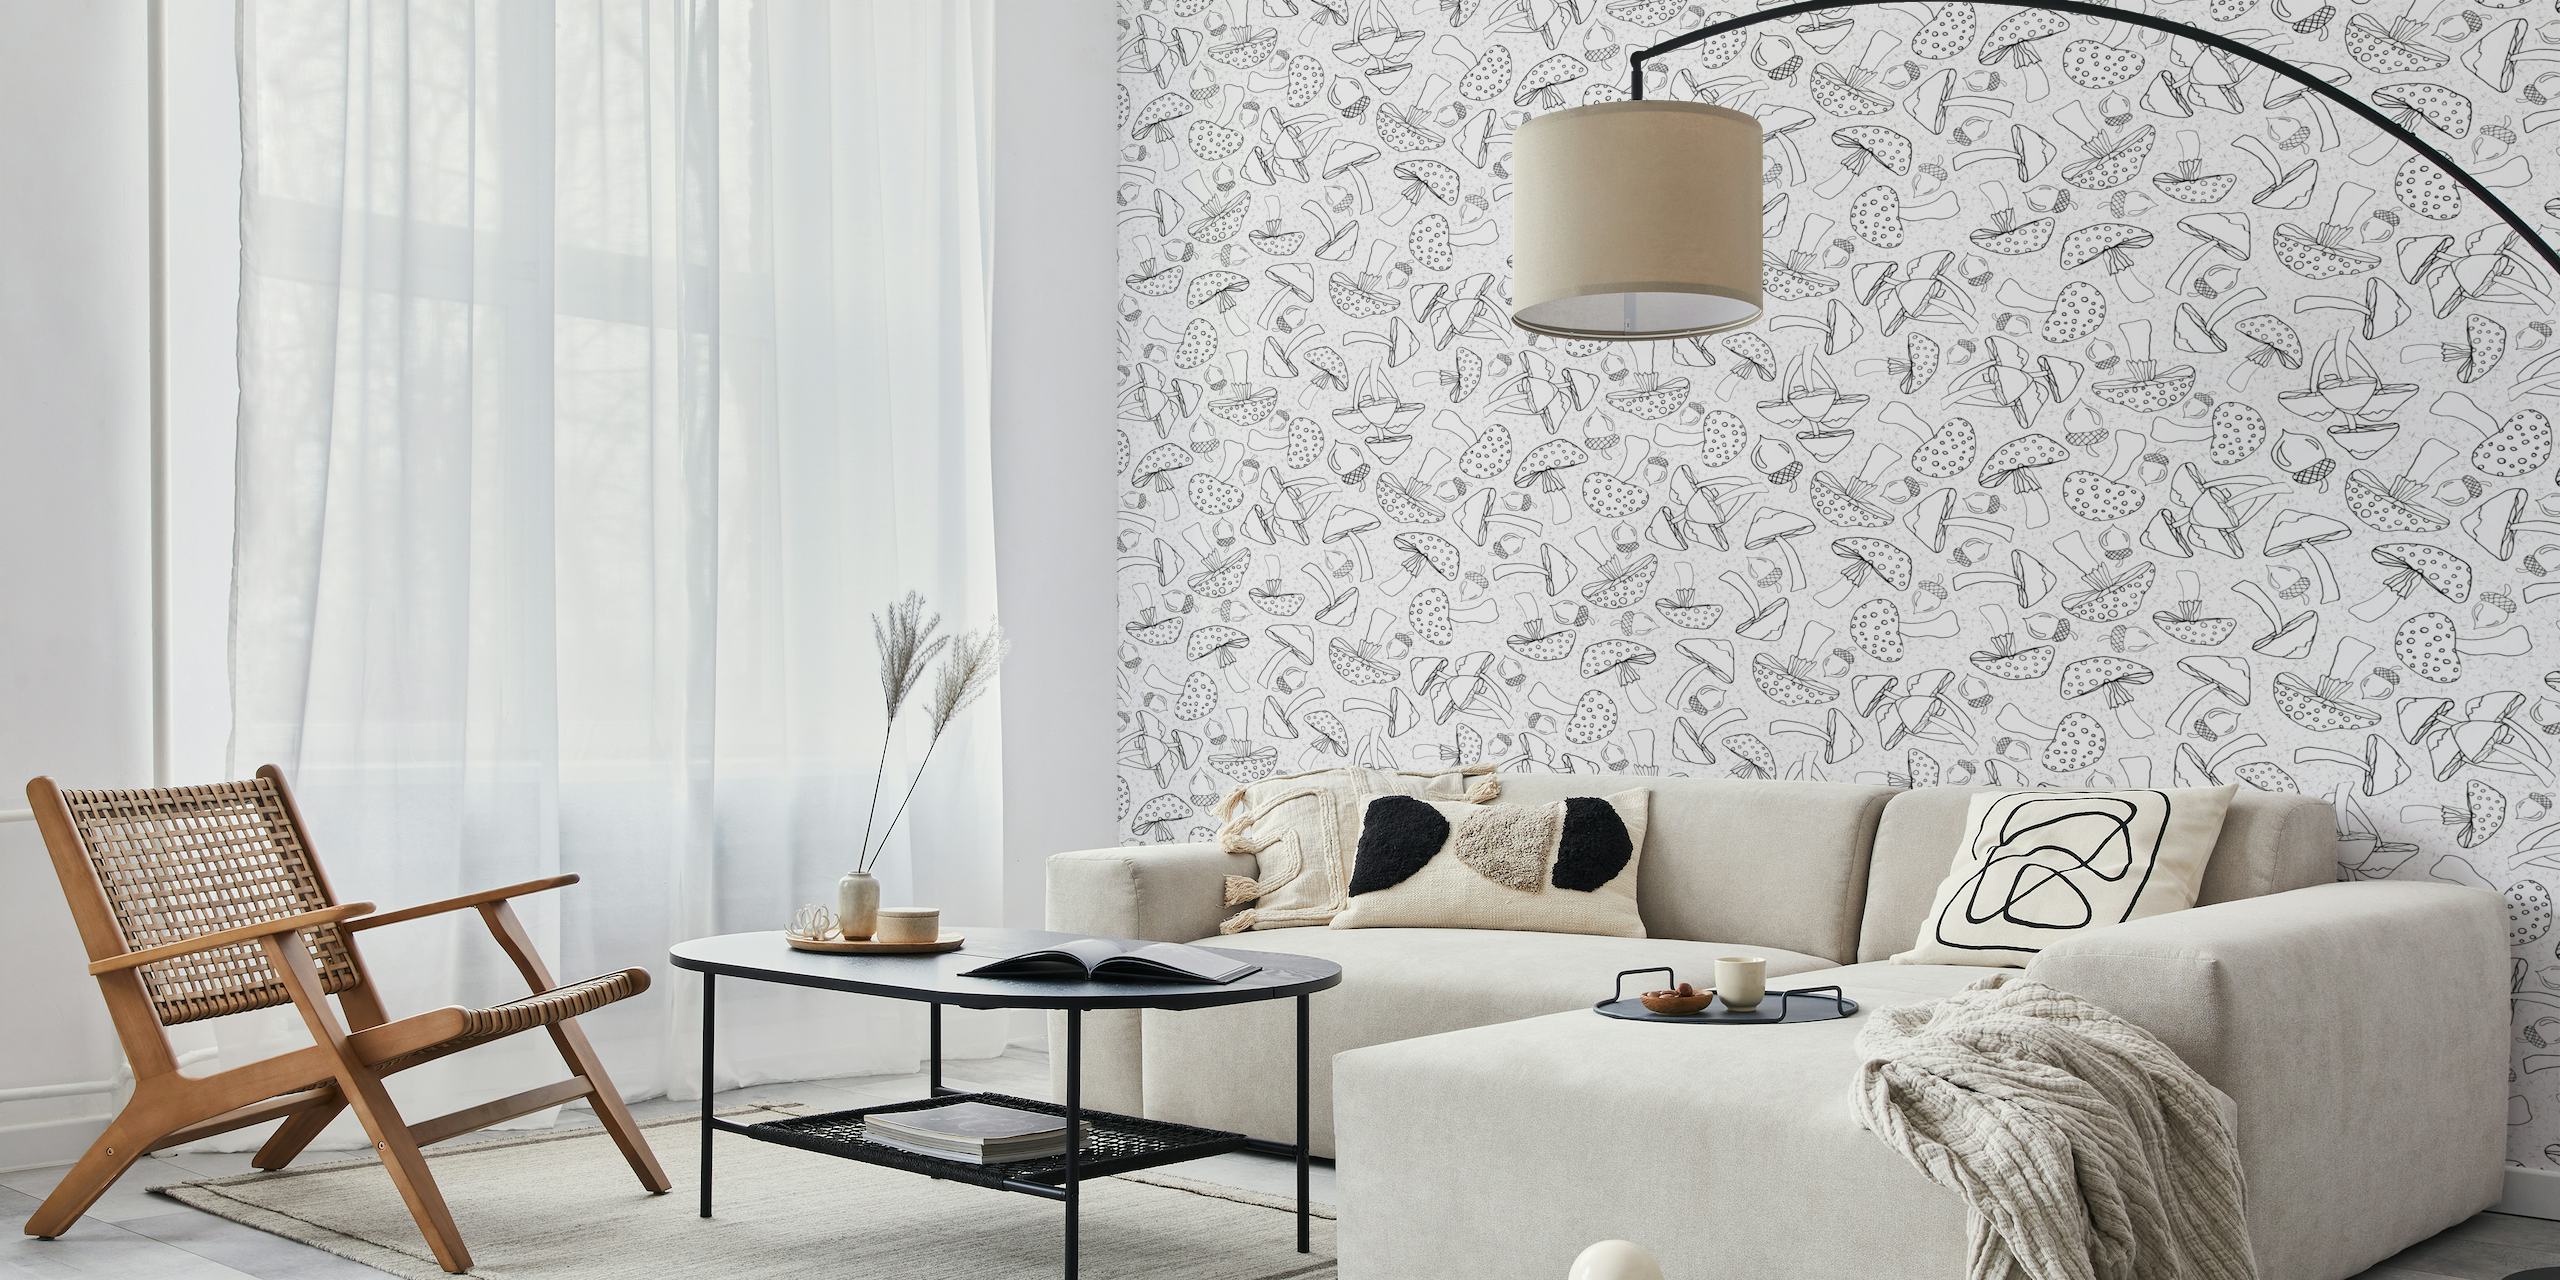 Black and white sketched mushrooms wall mural.